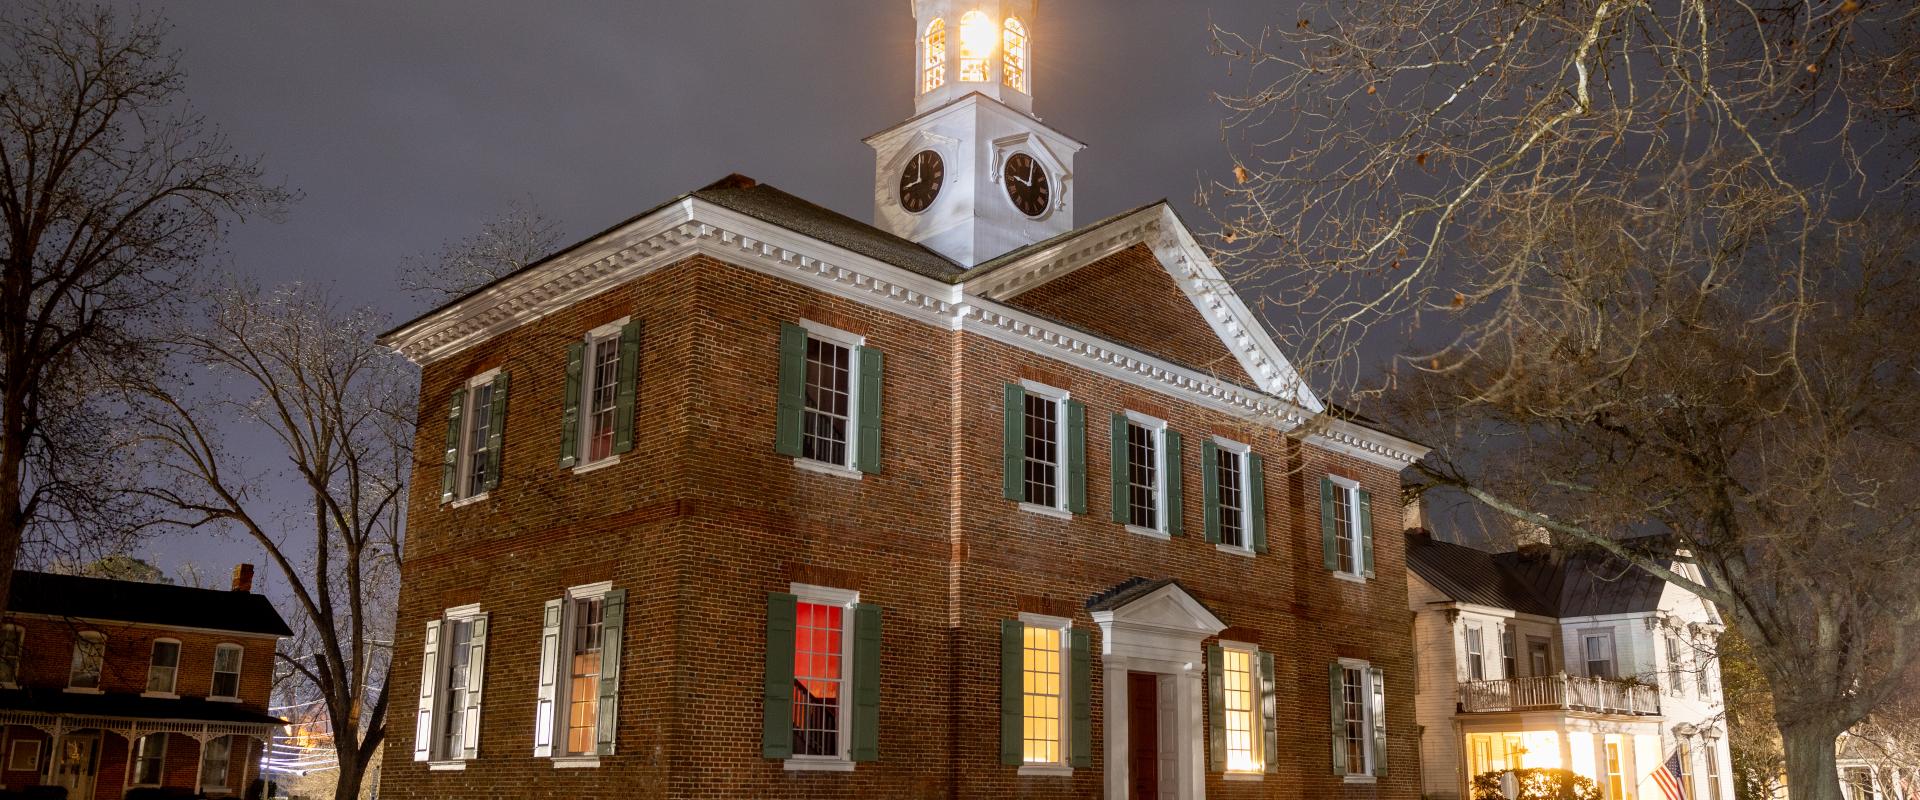 Historic 1767 Chowan County Courthouse by night 